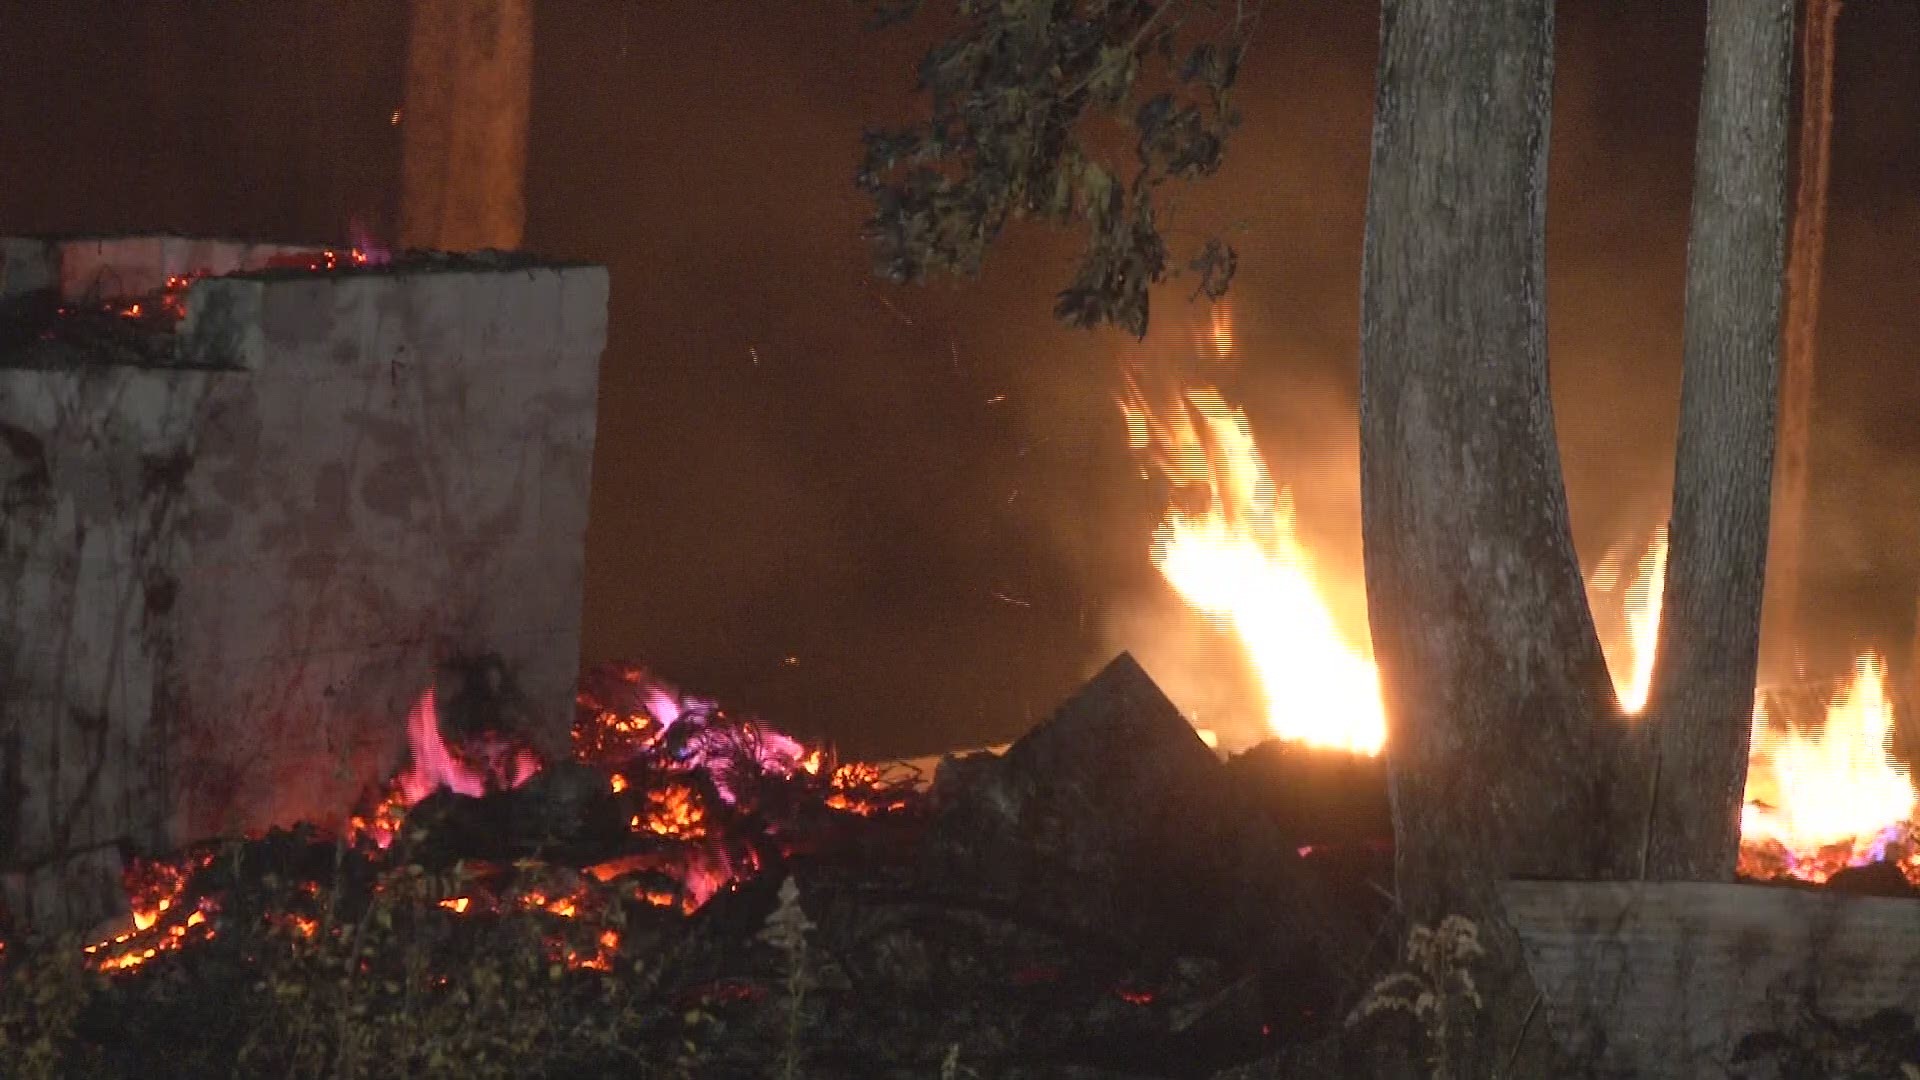 Famous Minister's Treehouse in Crossville destroyed after burning to the ground